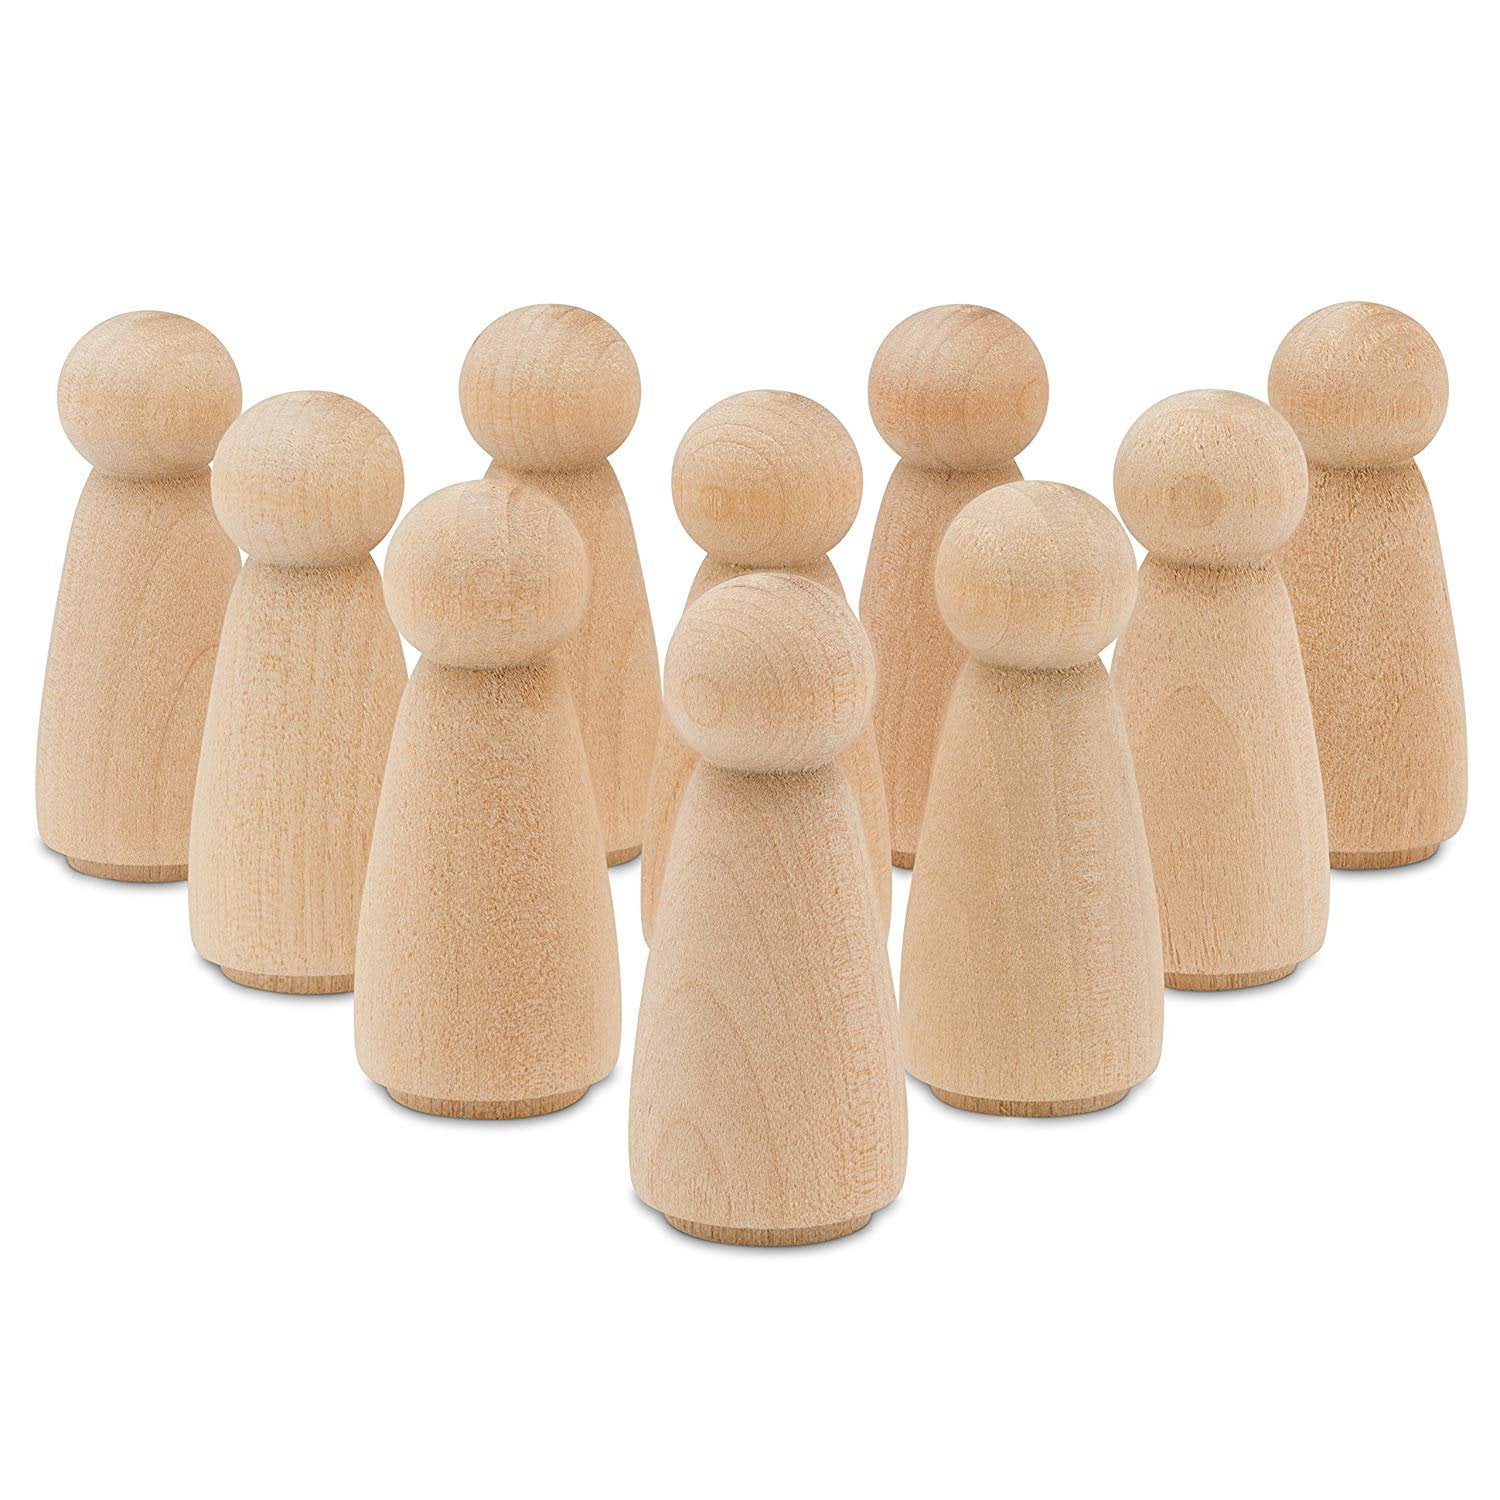 Home Party Decor Doll Bodies 50 Pack Unfinished Wooden Peg Dolls Decorative Peg Doll People for Kids DIY Art Craft Peg Game Painting Wooden Figures Peg People 